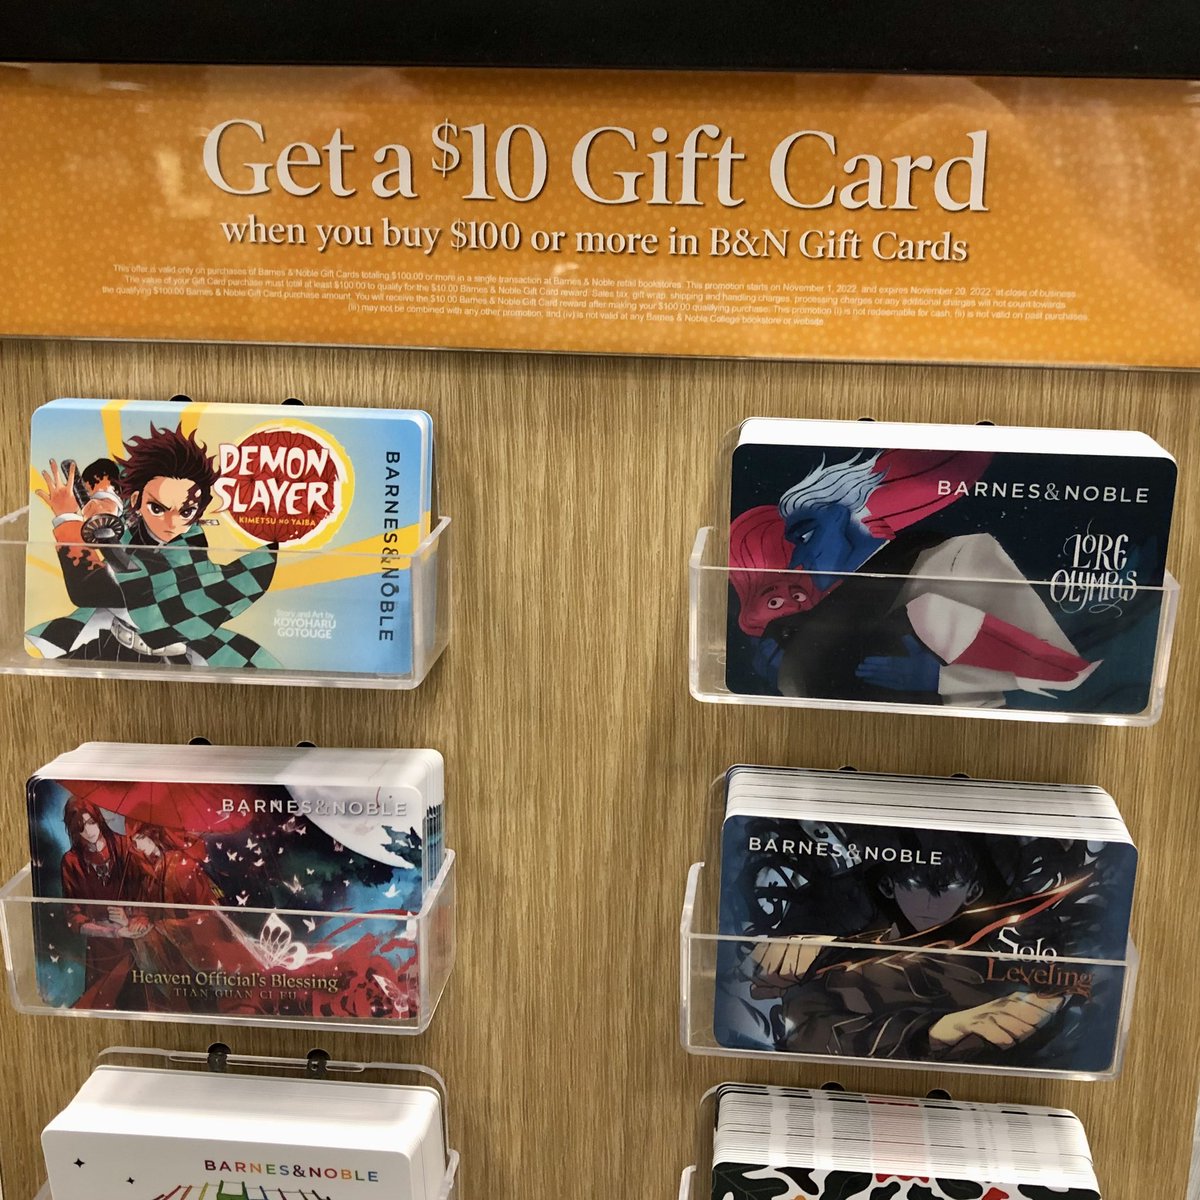 For a limited time, get a $10 gift card when you buy $100 or more in #bngiftcards! The perfect gift. 🎁 And look at these fun designs that came in with our selection of holiday-themed #giftcards. 

#manga #demonslayer #heavenofficialsblessing #loreolympus #sololeveling #142bn